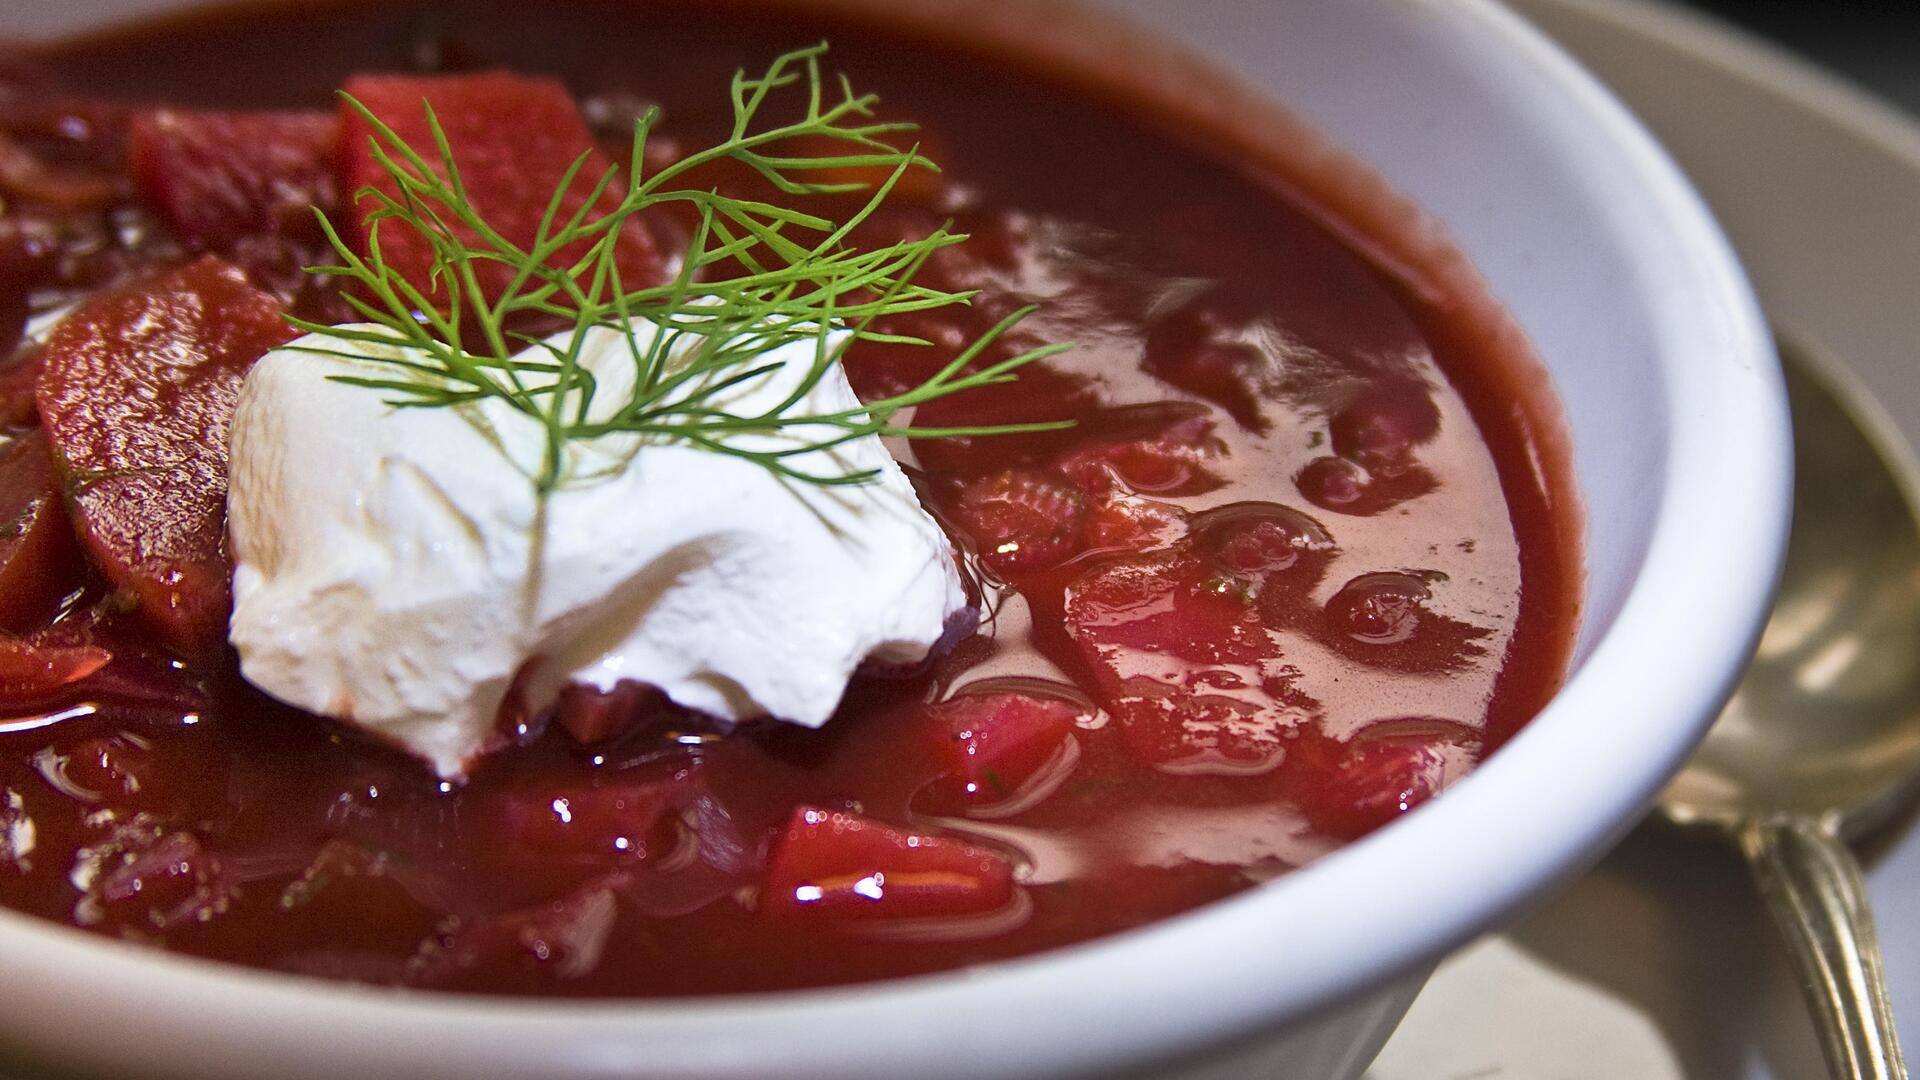 Ukraine on your plate: Make this delicious borscht at home